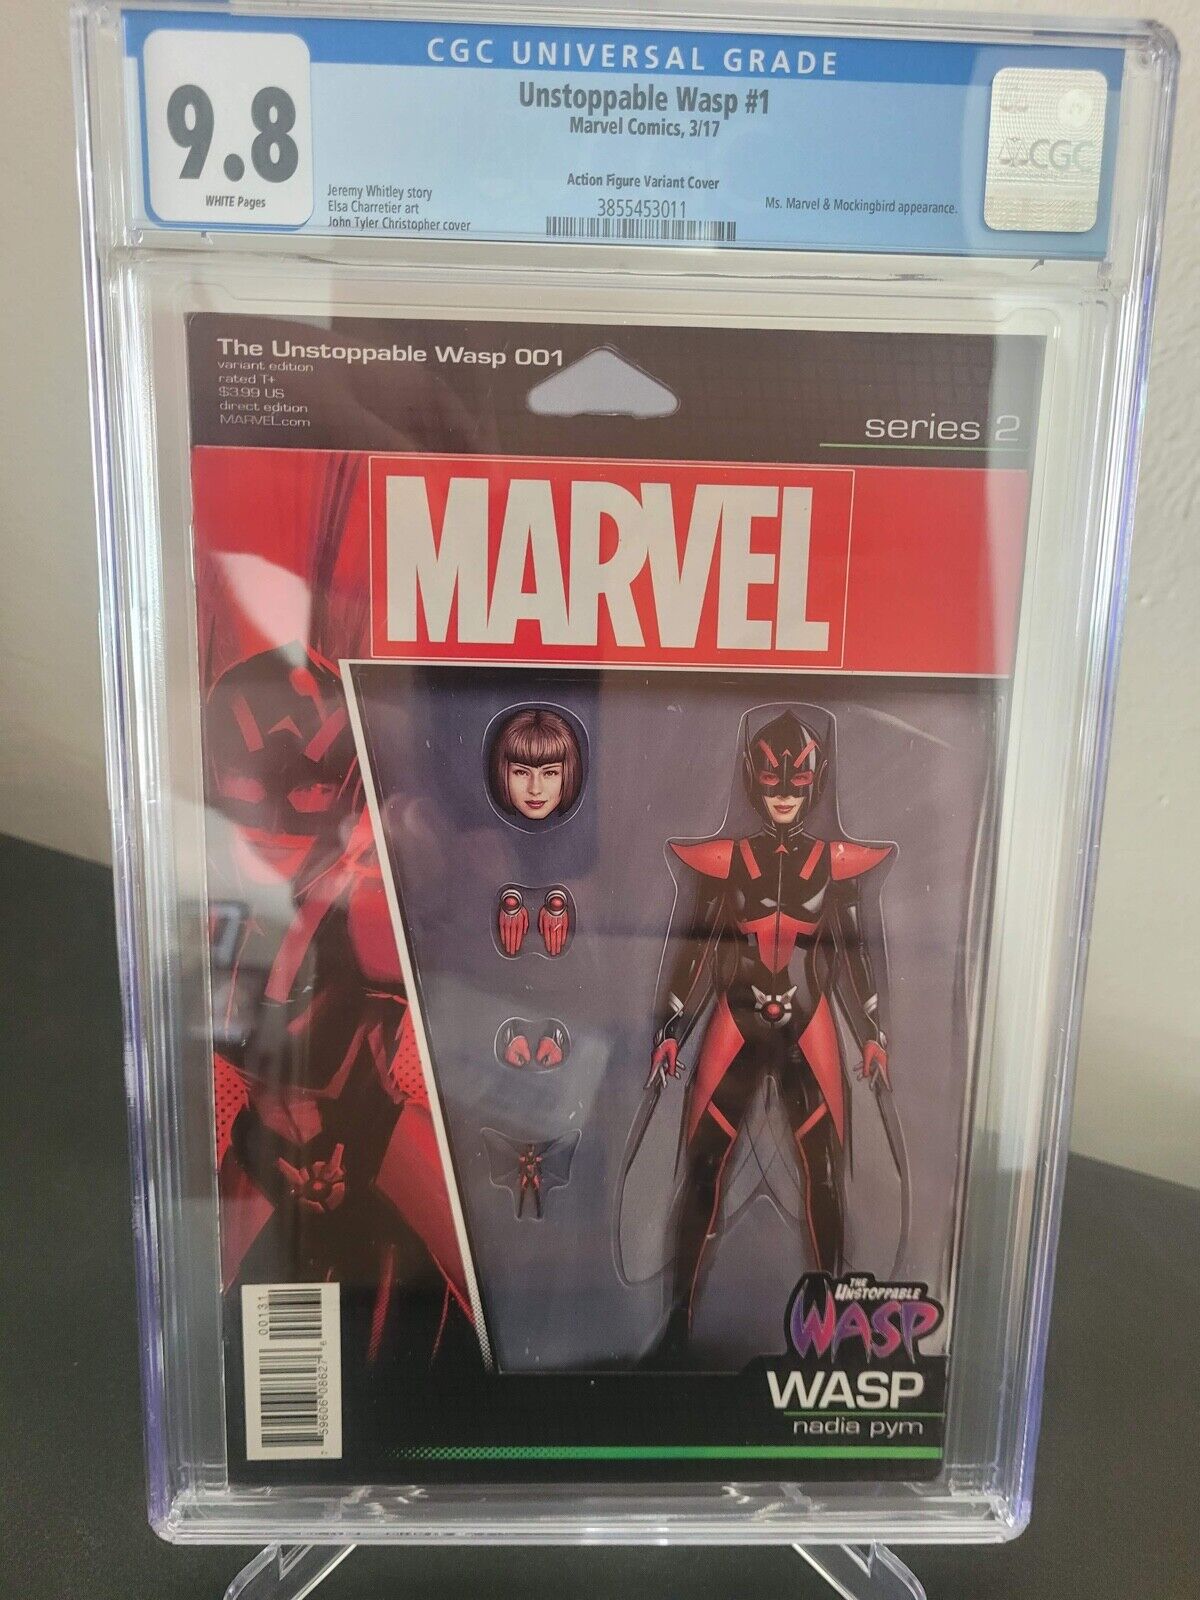 UNSTOPPABLE WASP #1 CGC 9.8 GRADED MARVEL COMICS ACTION FIGURE VARIANT COVER